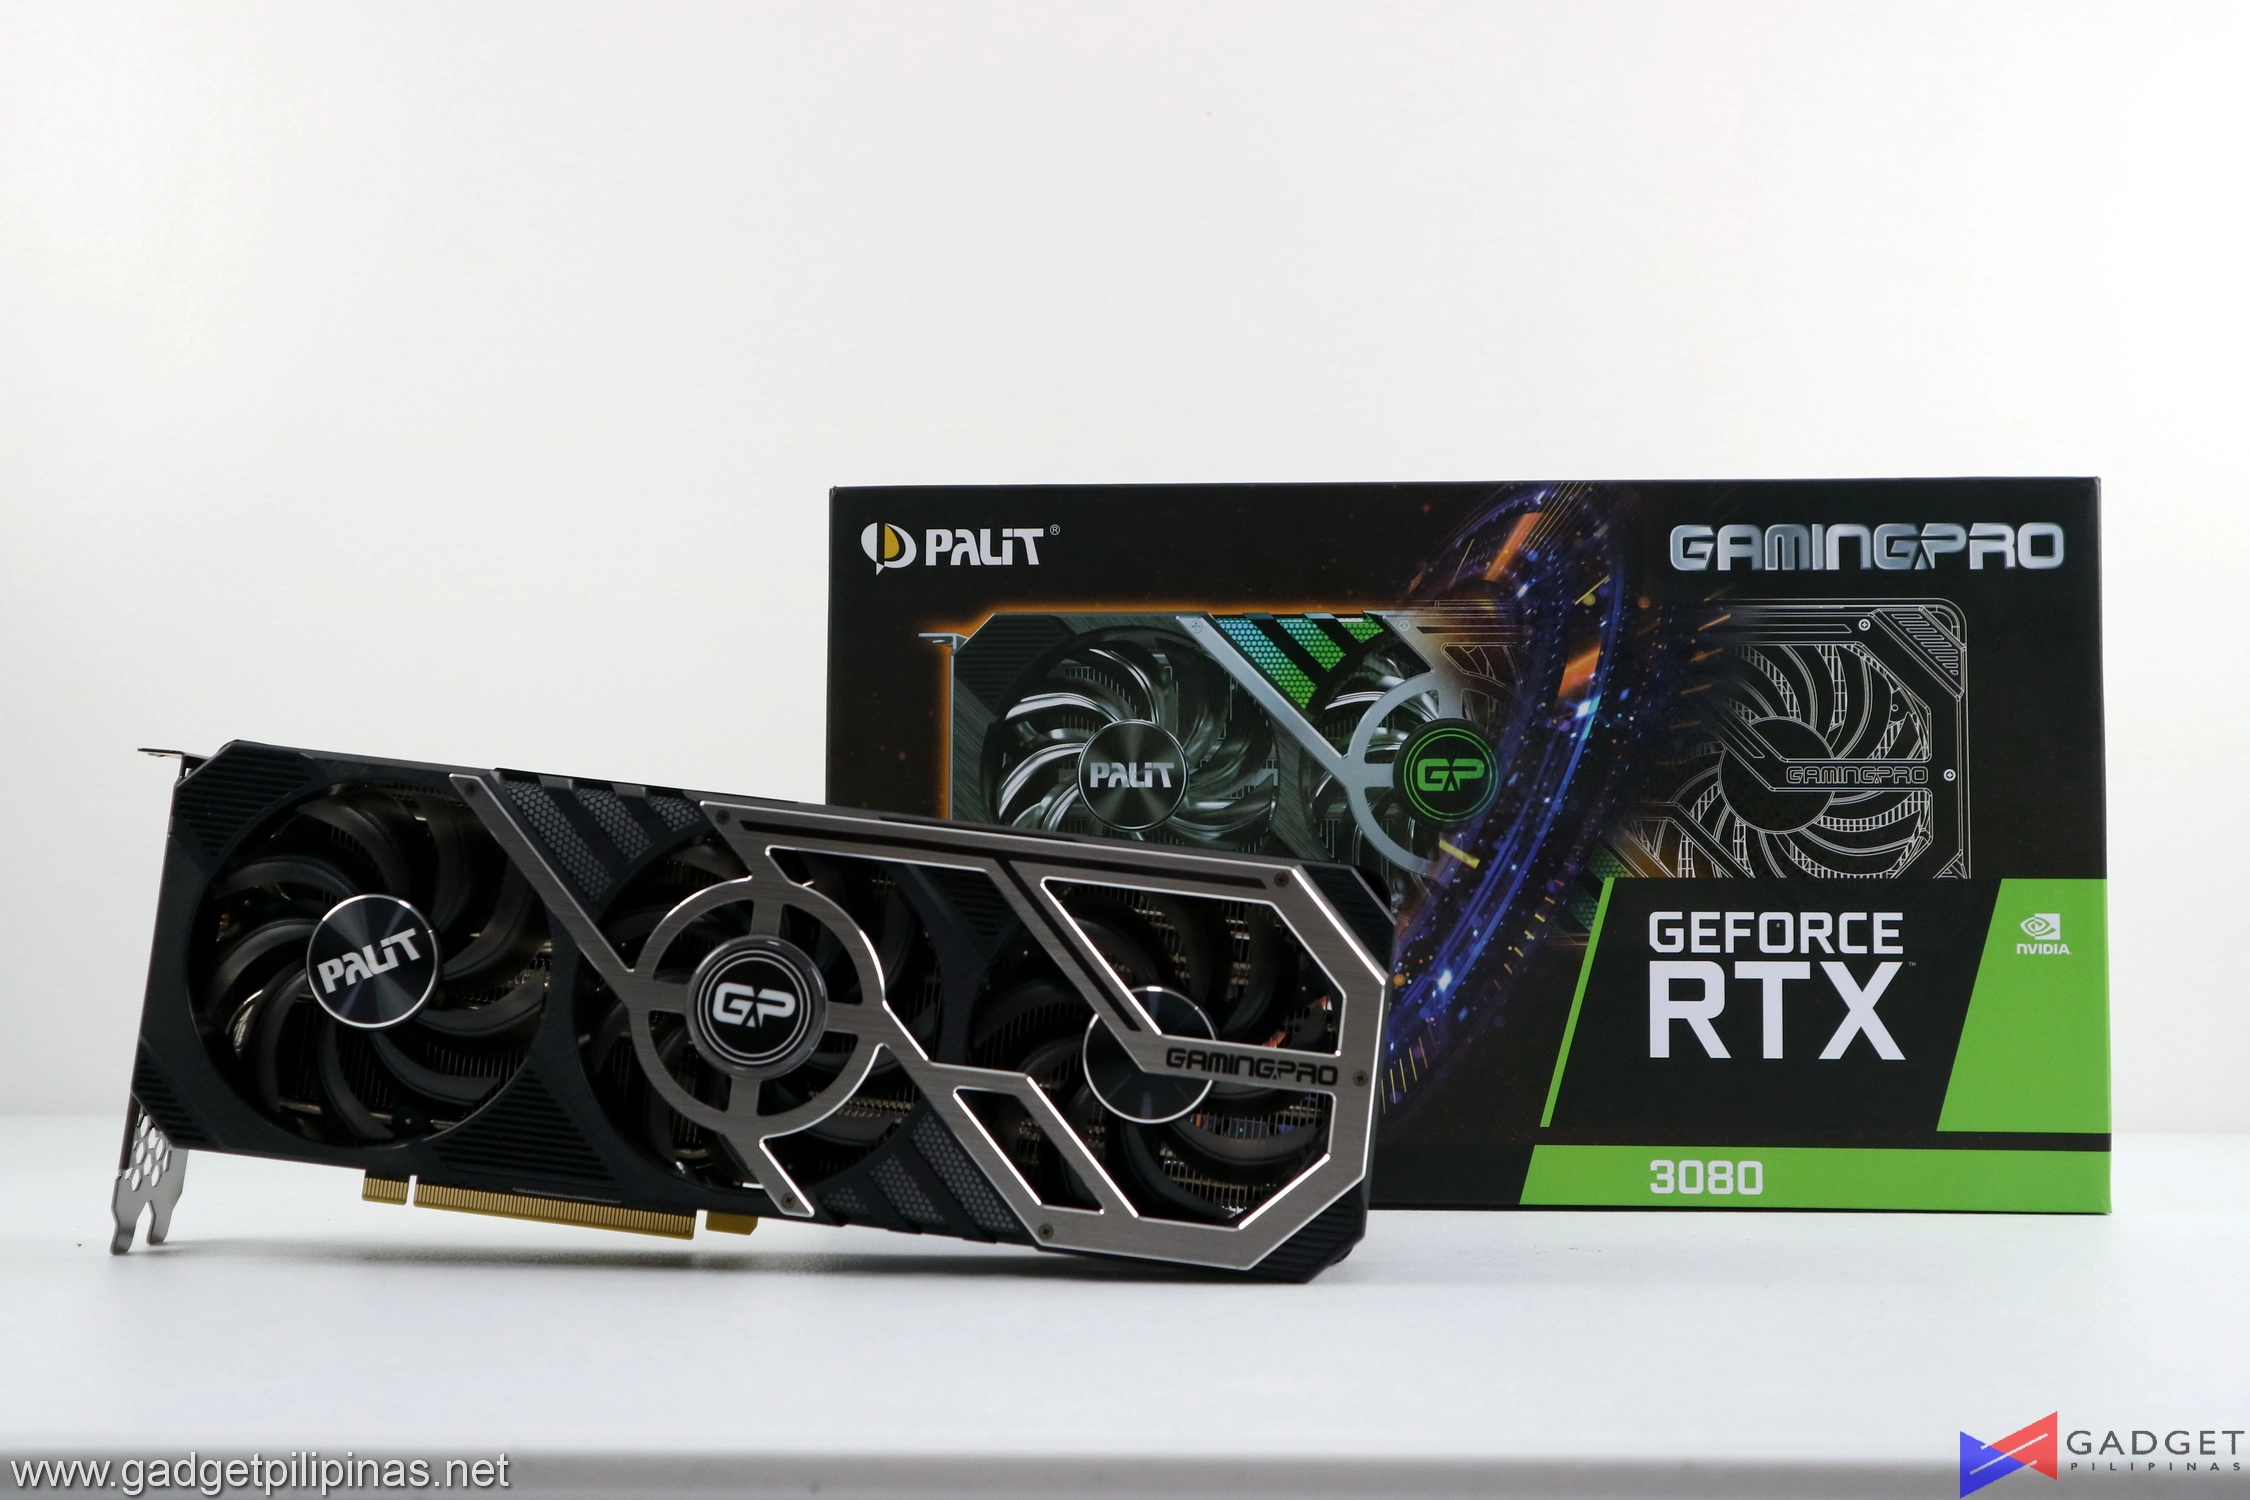 Palit GeForce RTX 3080 Gaming Pro Graphics Card Review